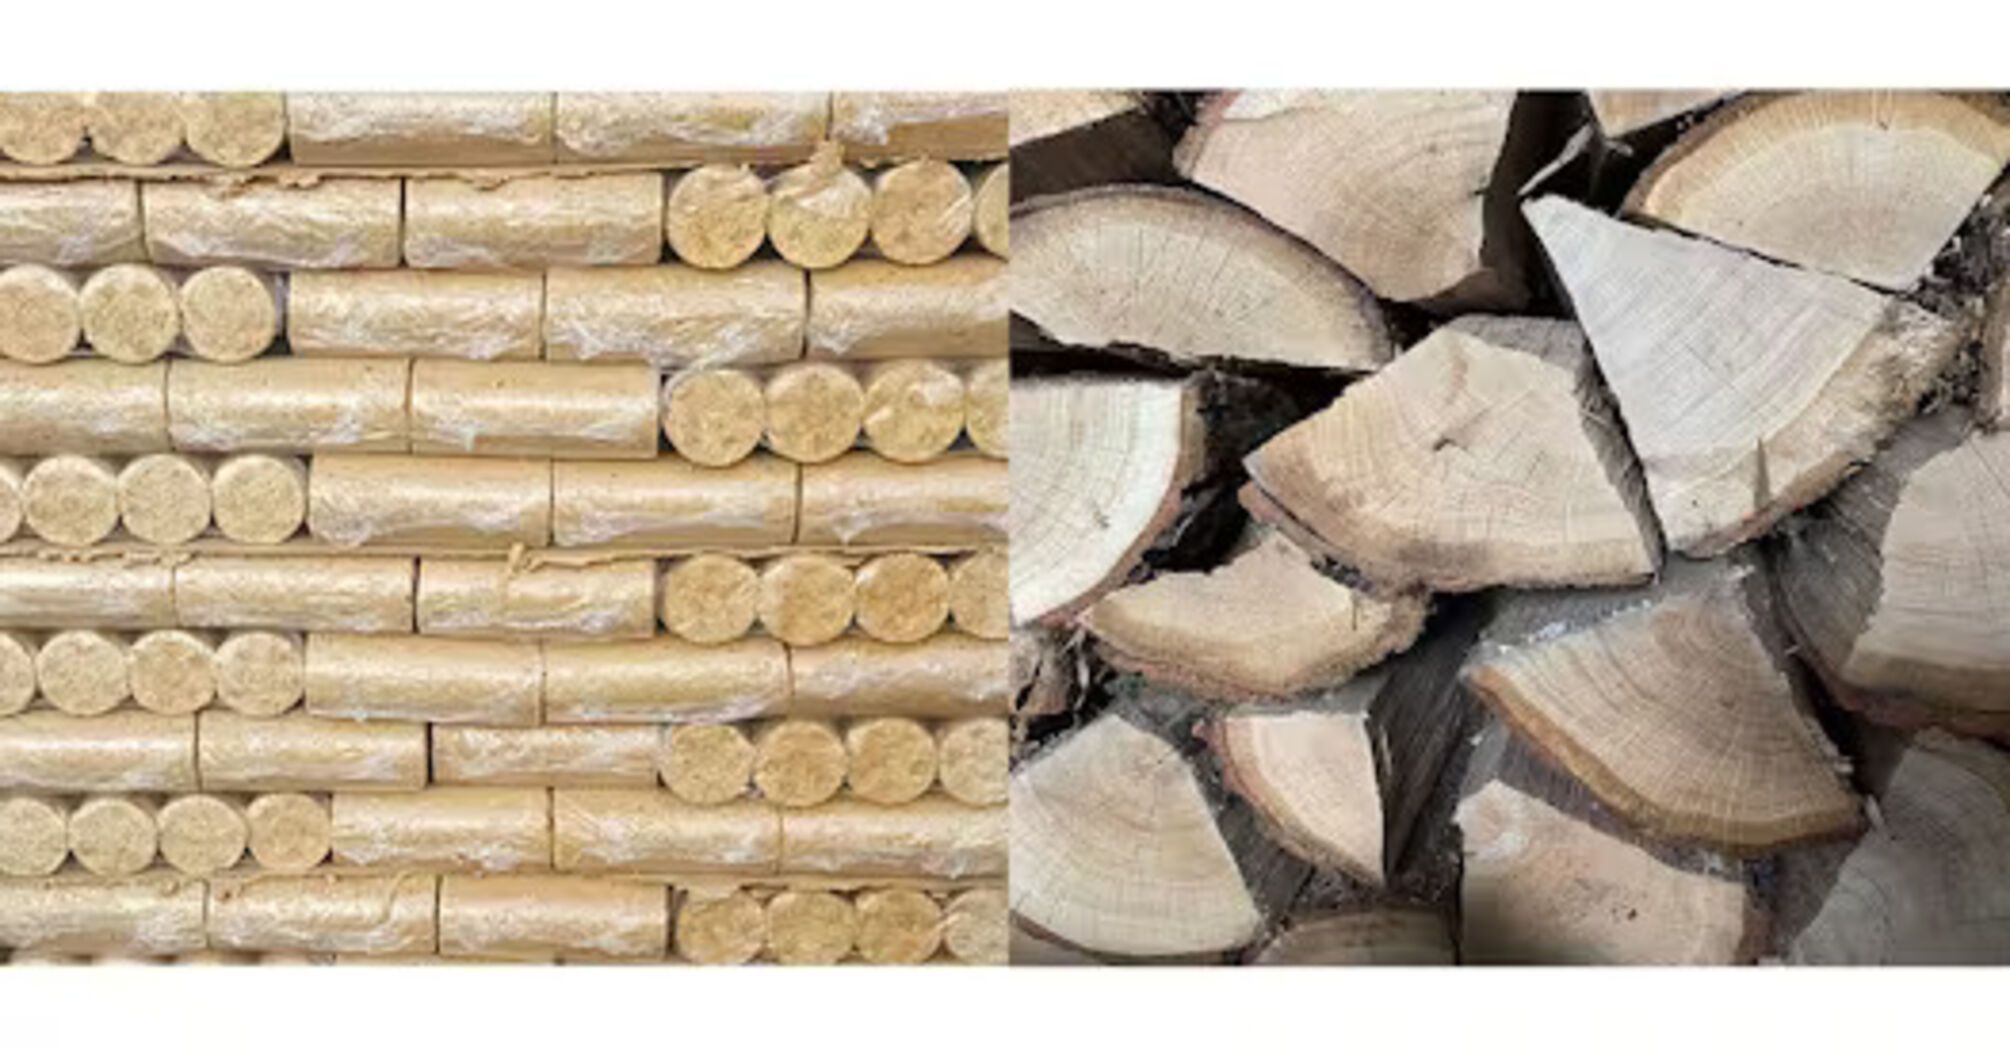 Firewood or briquettes